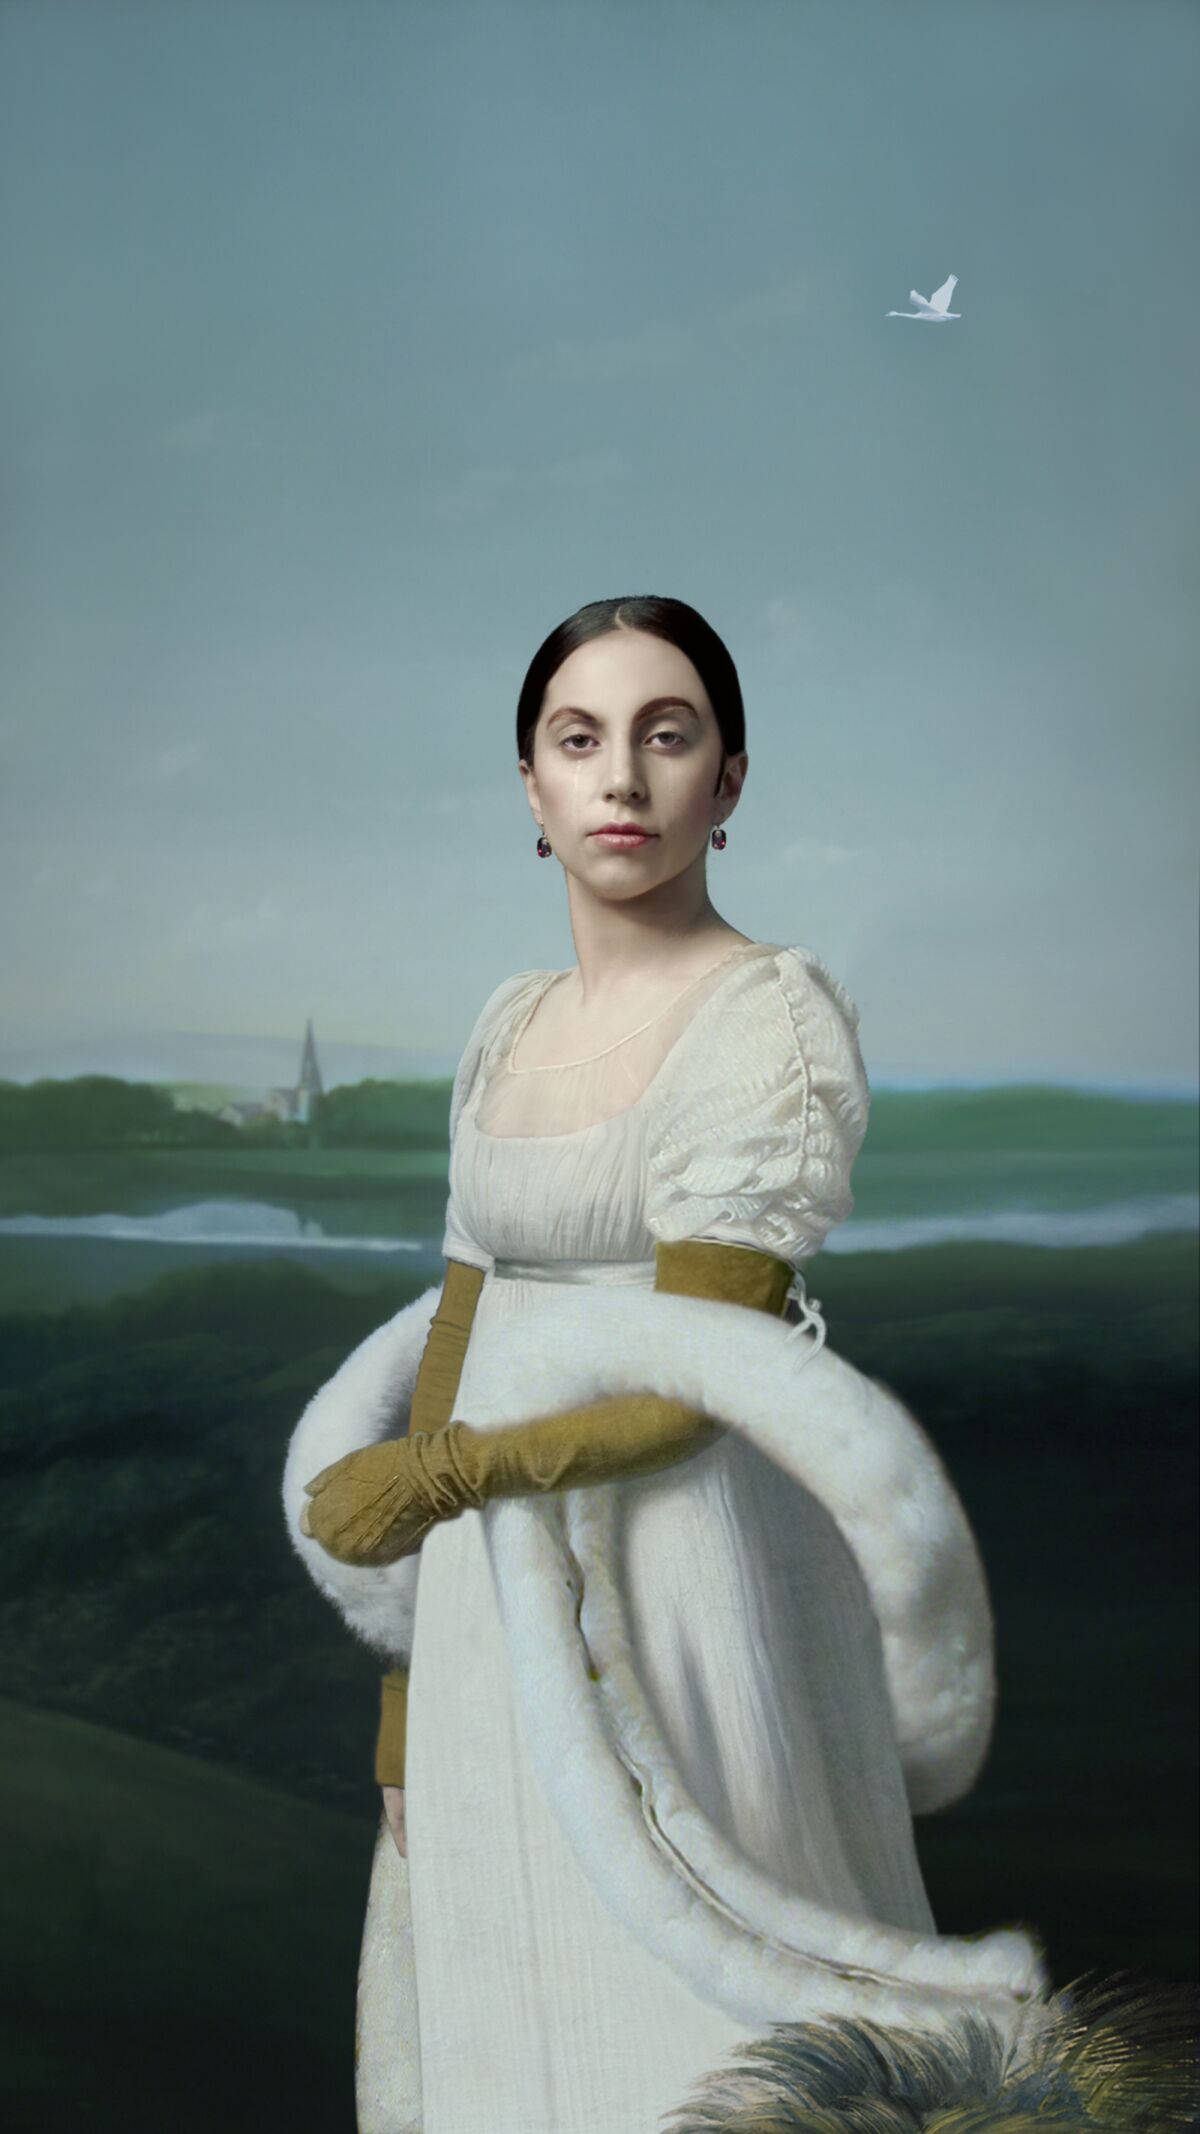 Lady Gaga re-creates a French 19th-century painting in video portrait by Robert Wilson.